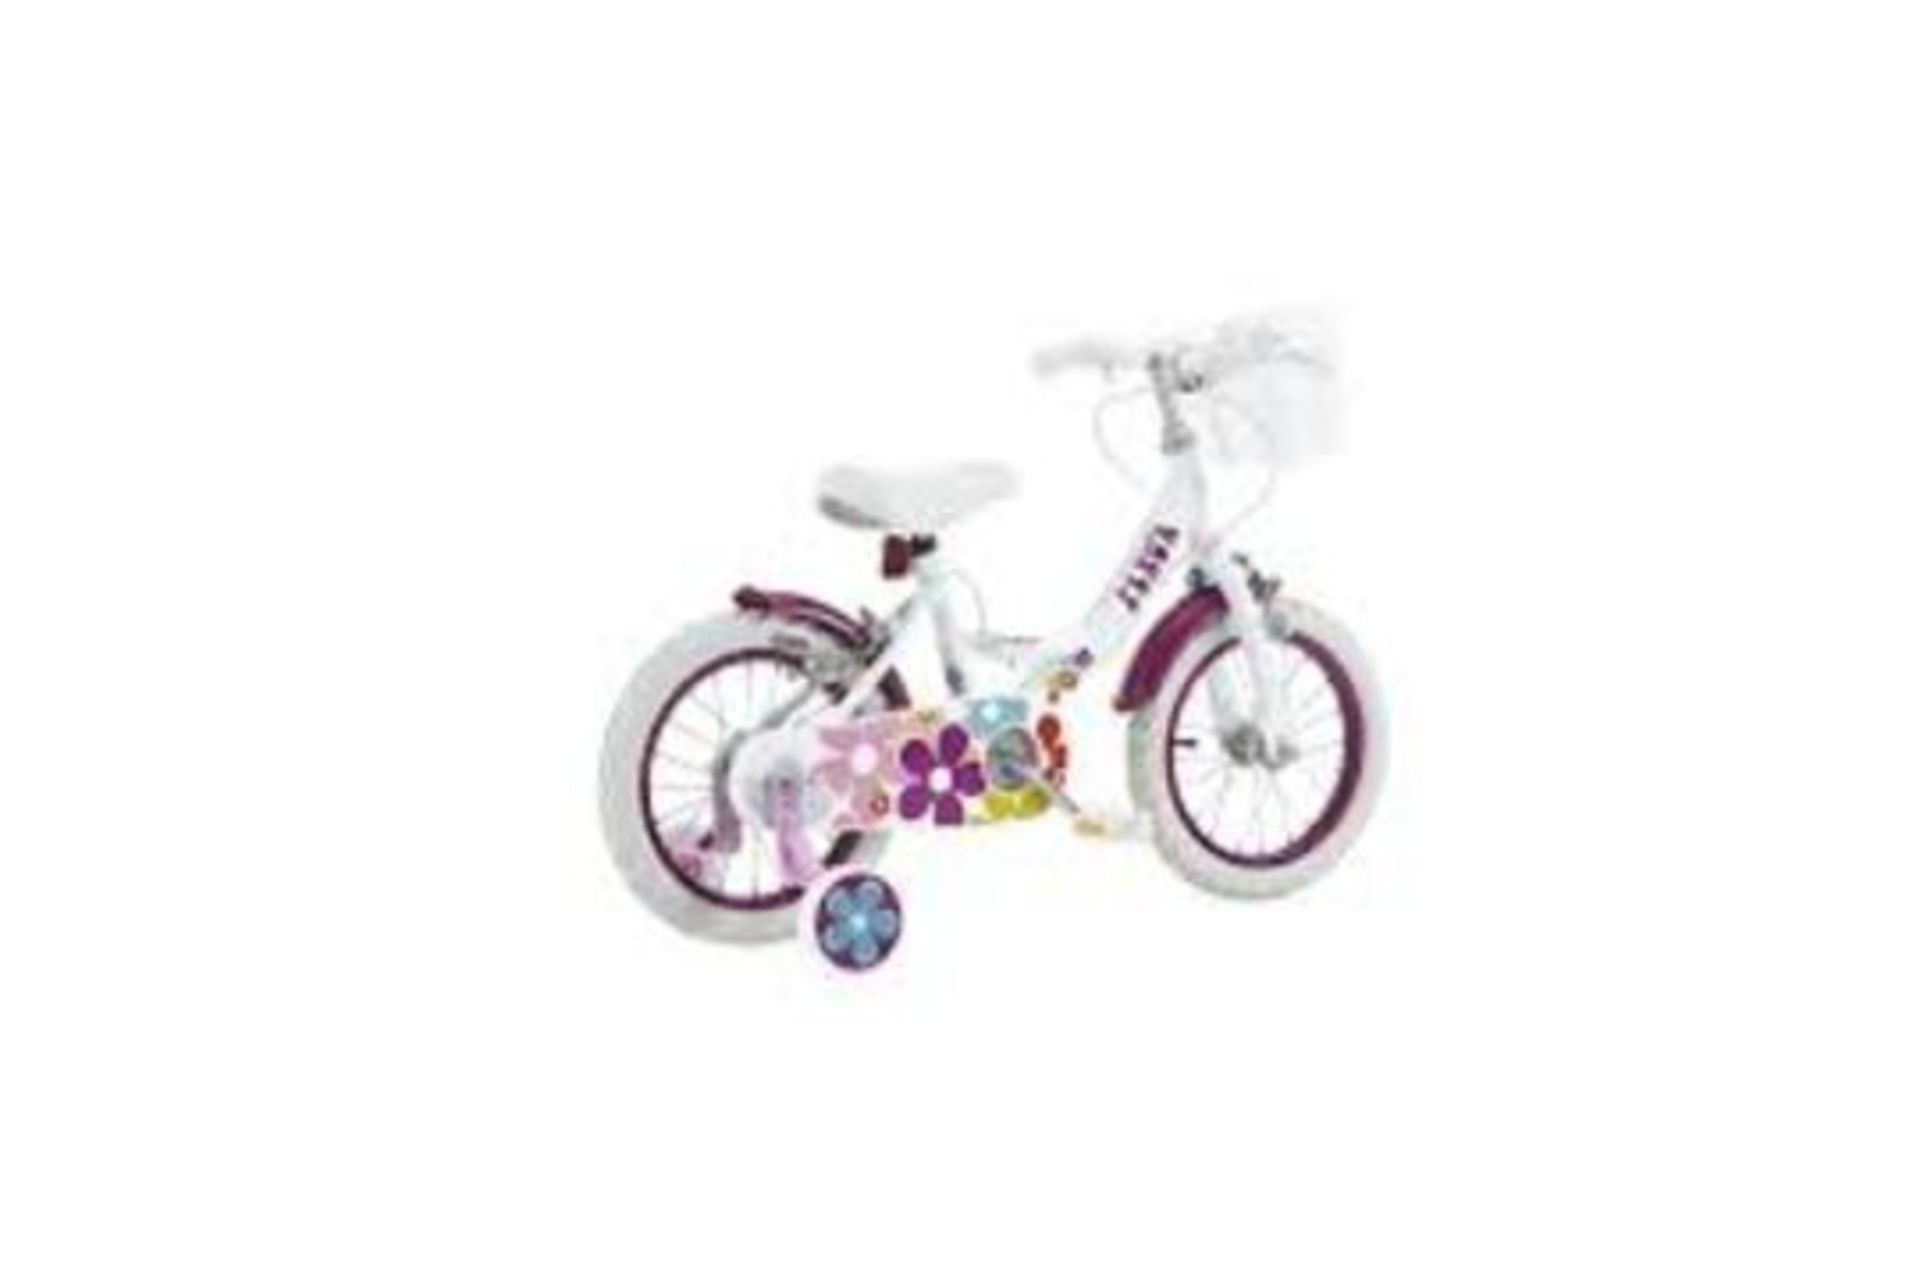 NEW BOXED Insync Kitten 14" Wheel Girls Bicycle RRP £169.99 (ROW7). Has a full chain guard which